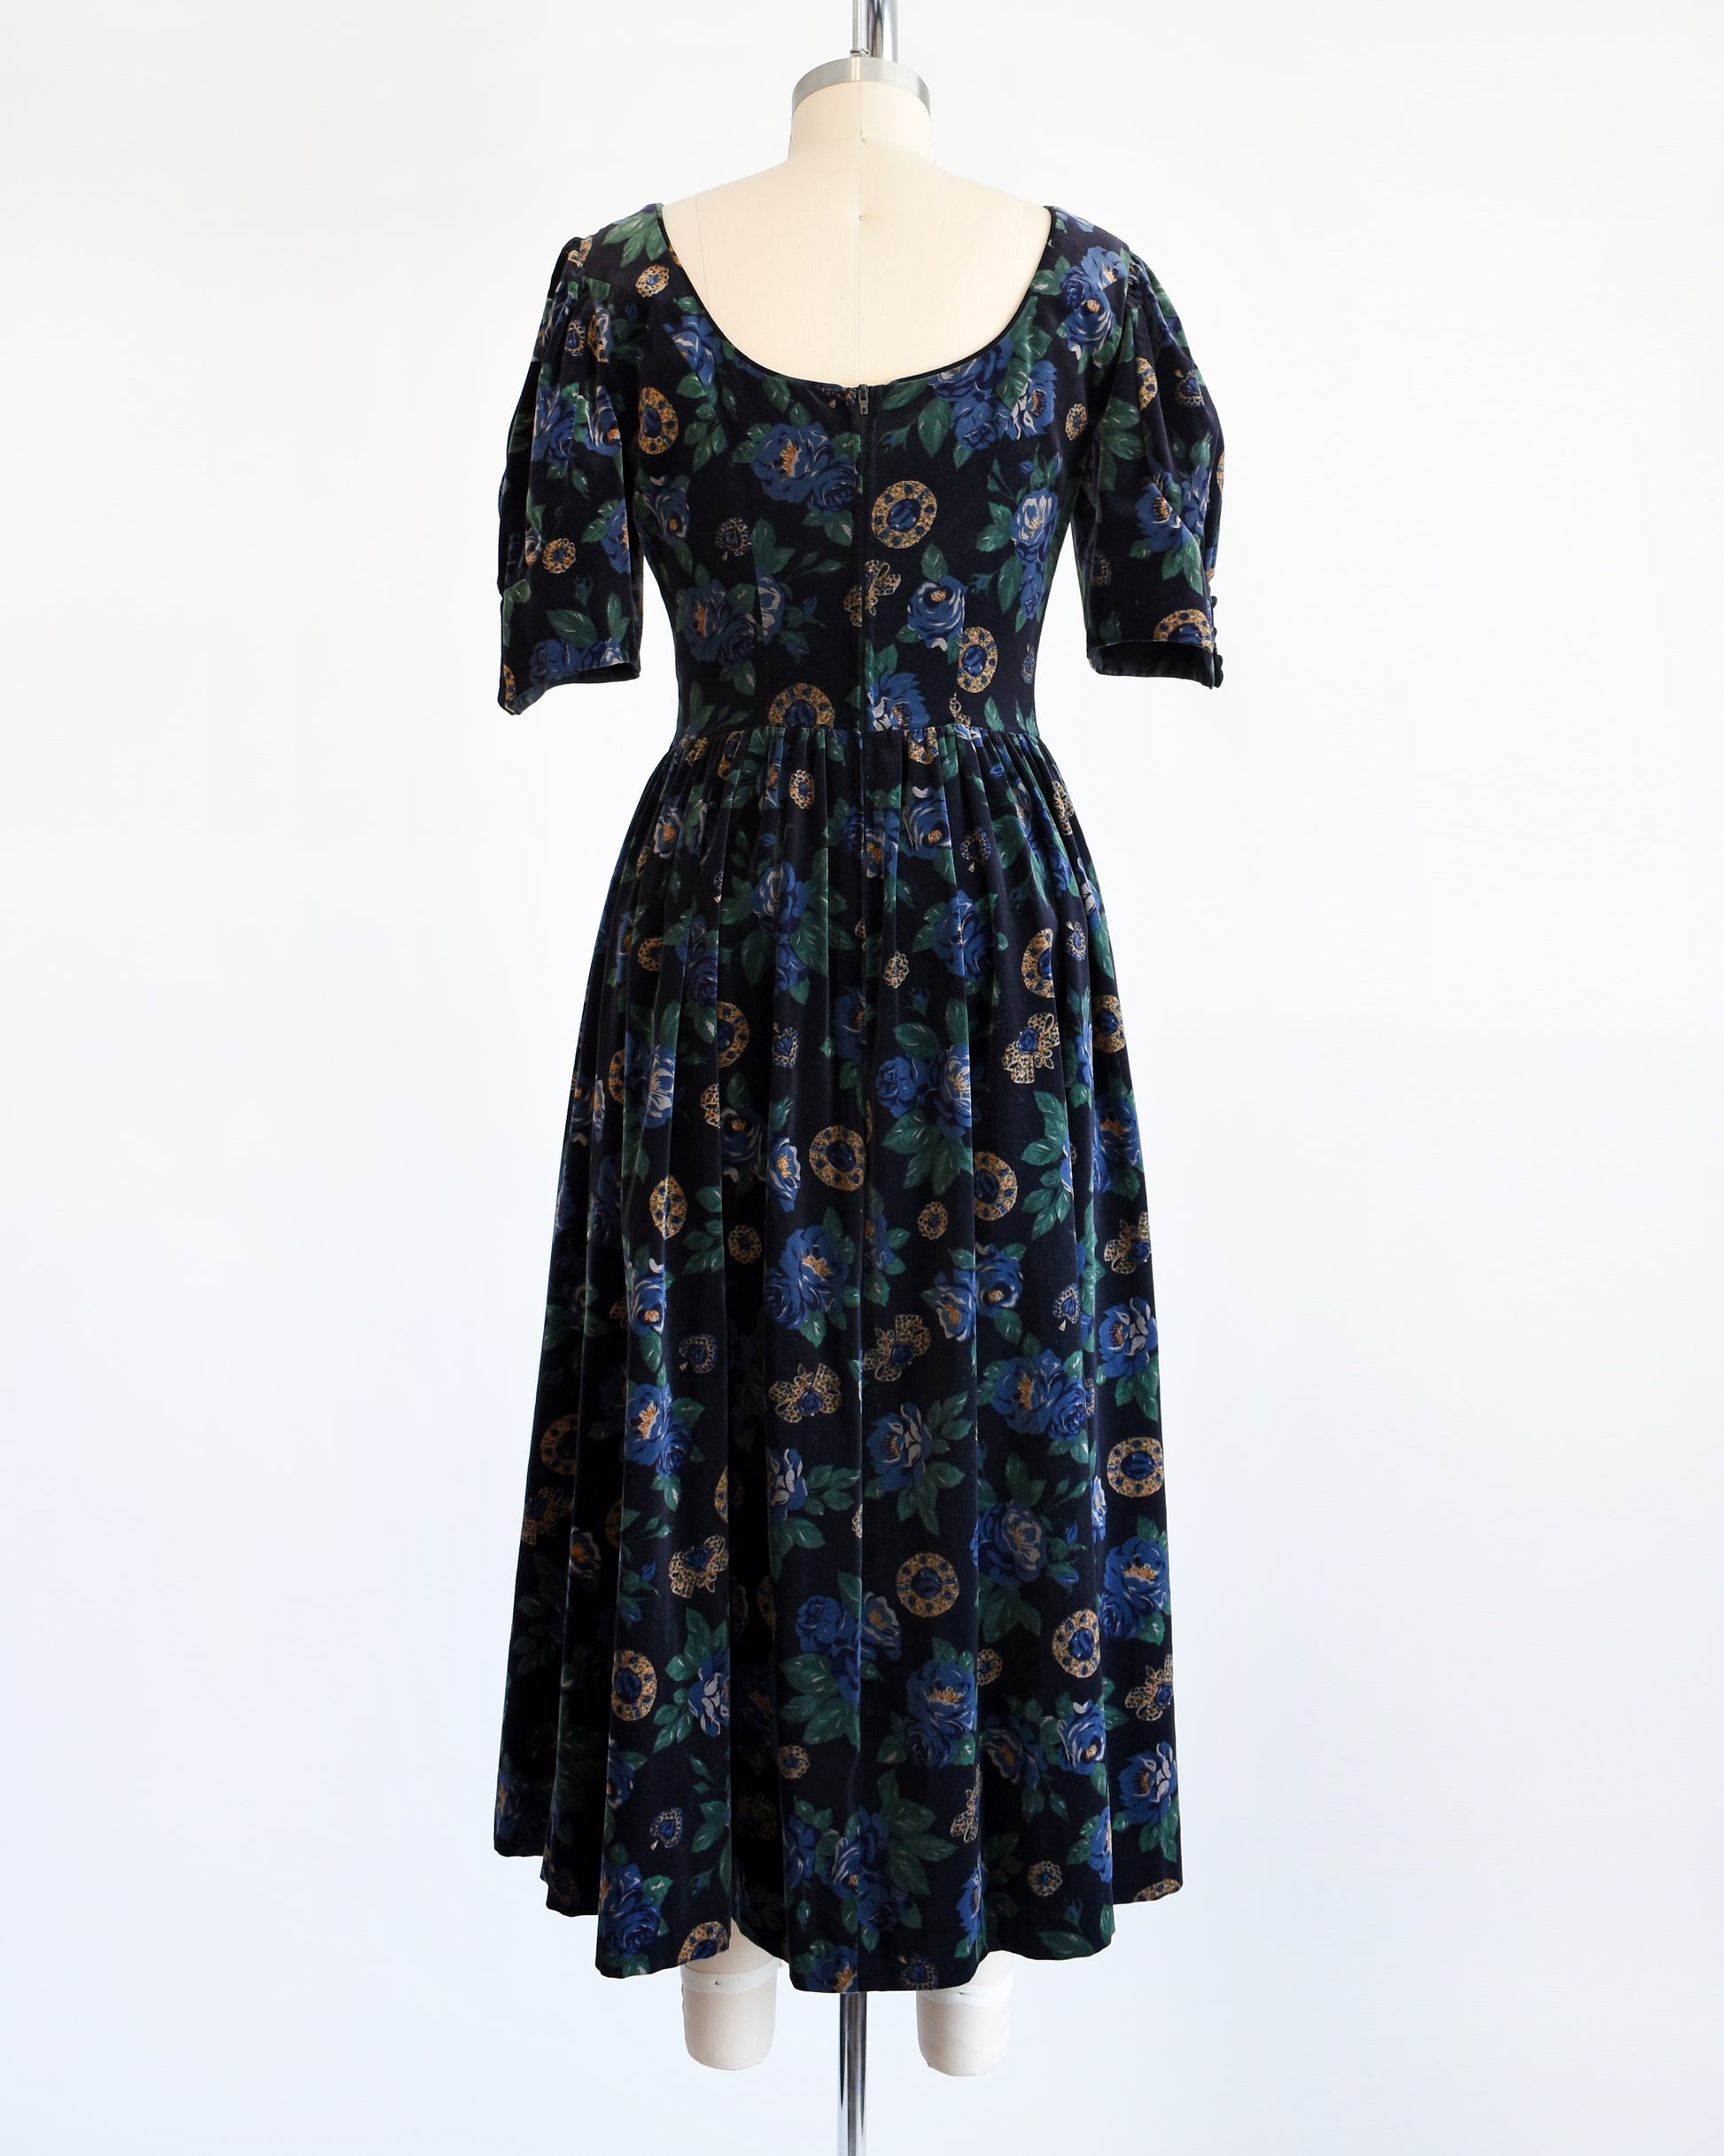 Back view of a vintage 1980s Laura Ashley dress. Black cotton velvet with a navy blue floral and metal gold jewels print.